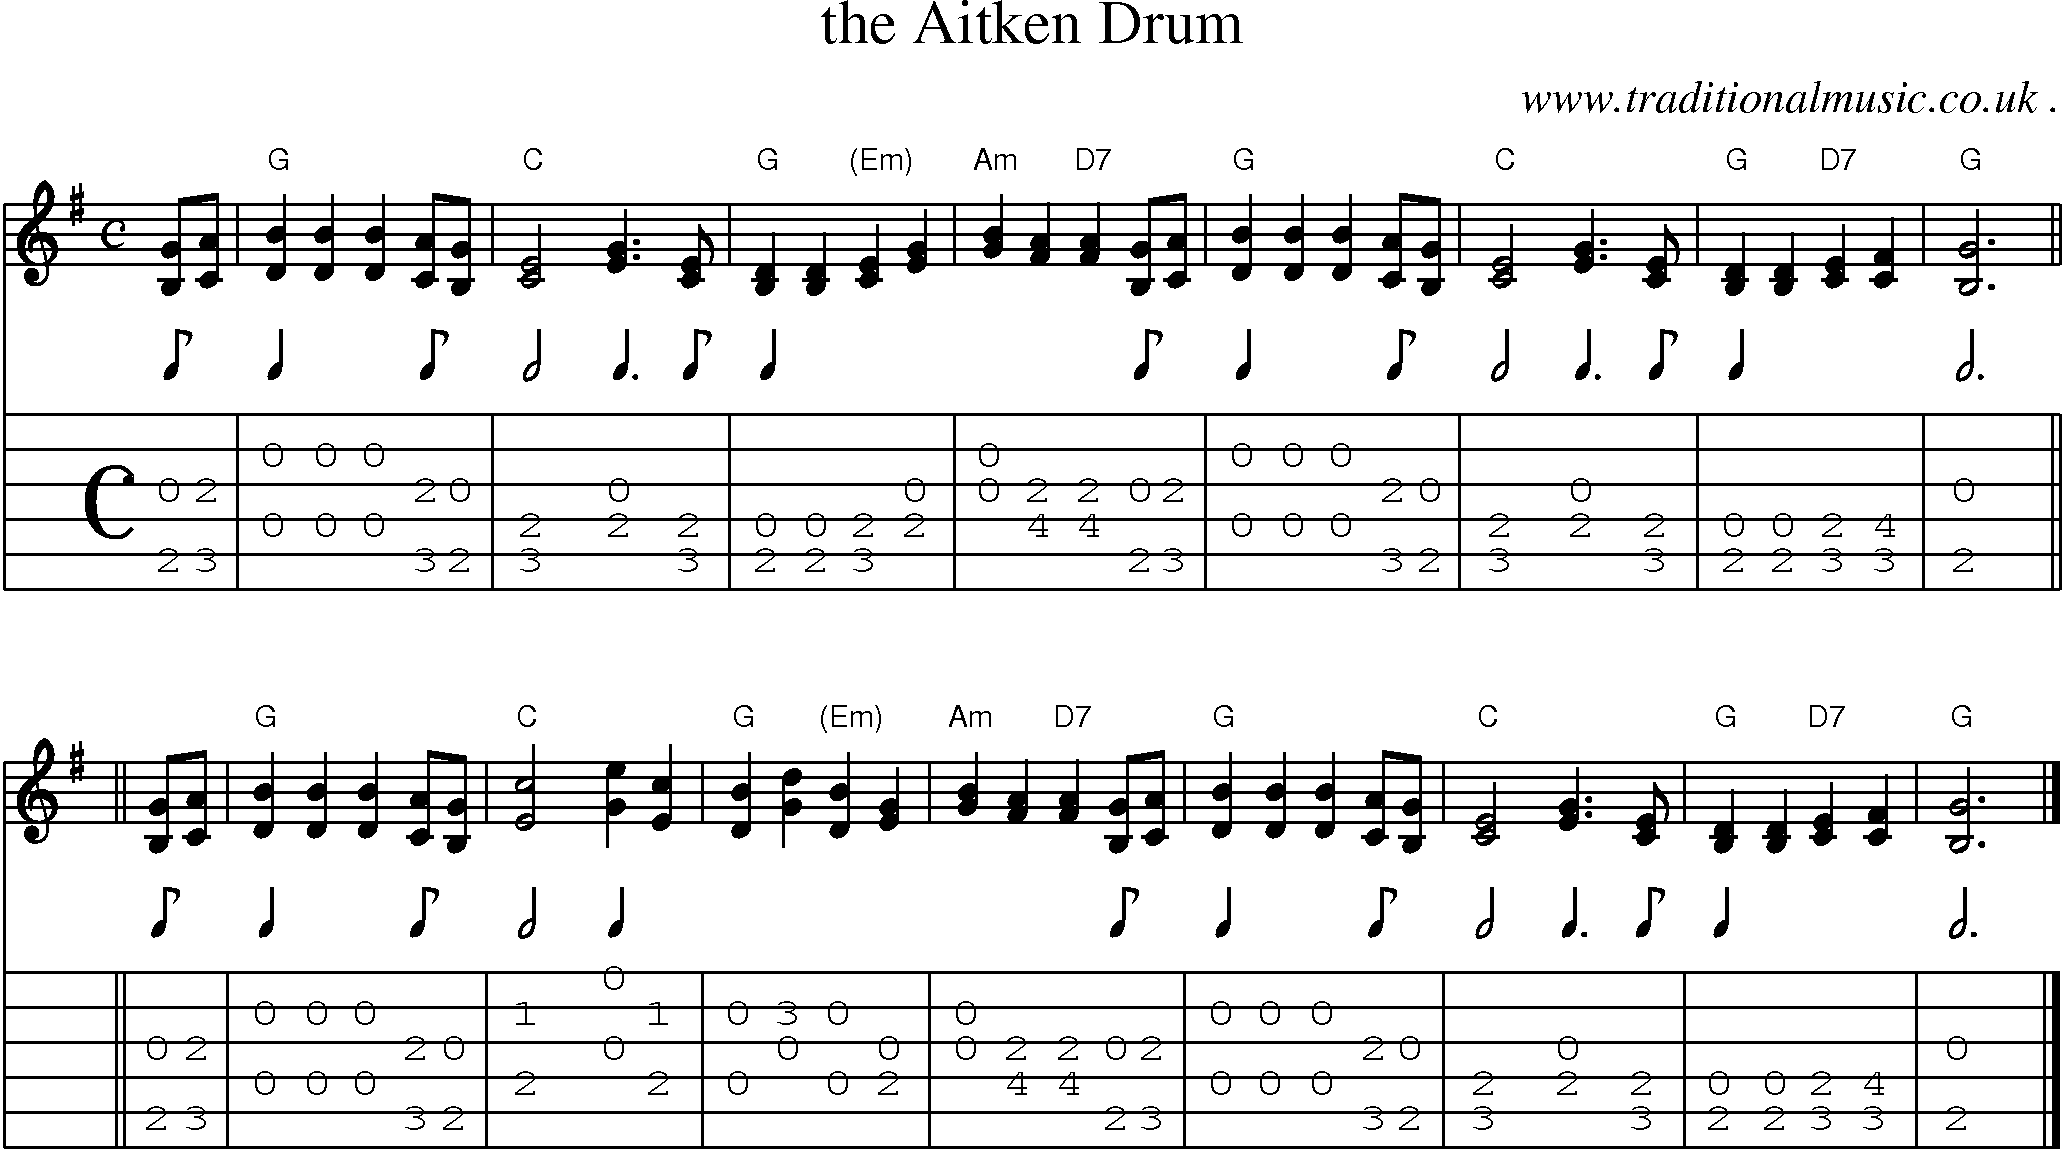 Sheet-music  score, Chords and Guitar Tabs for The Aitken Drum